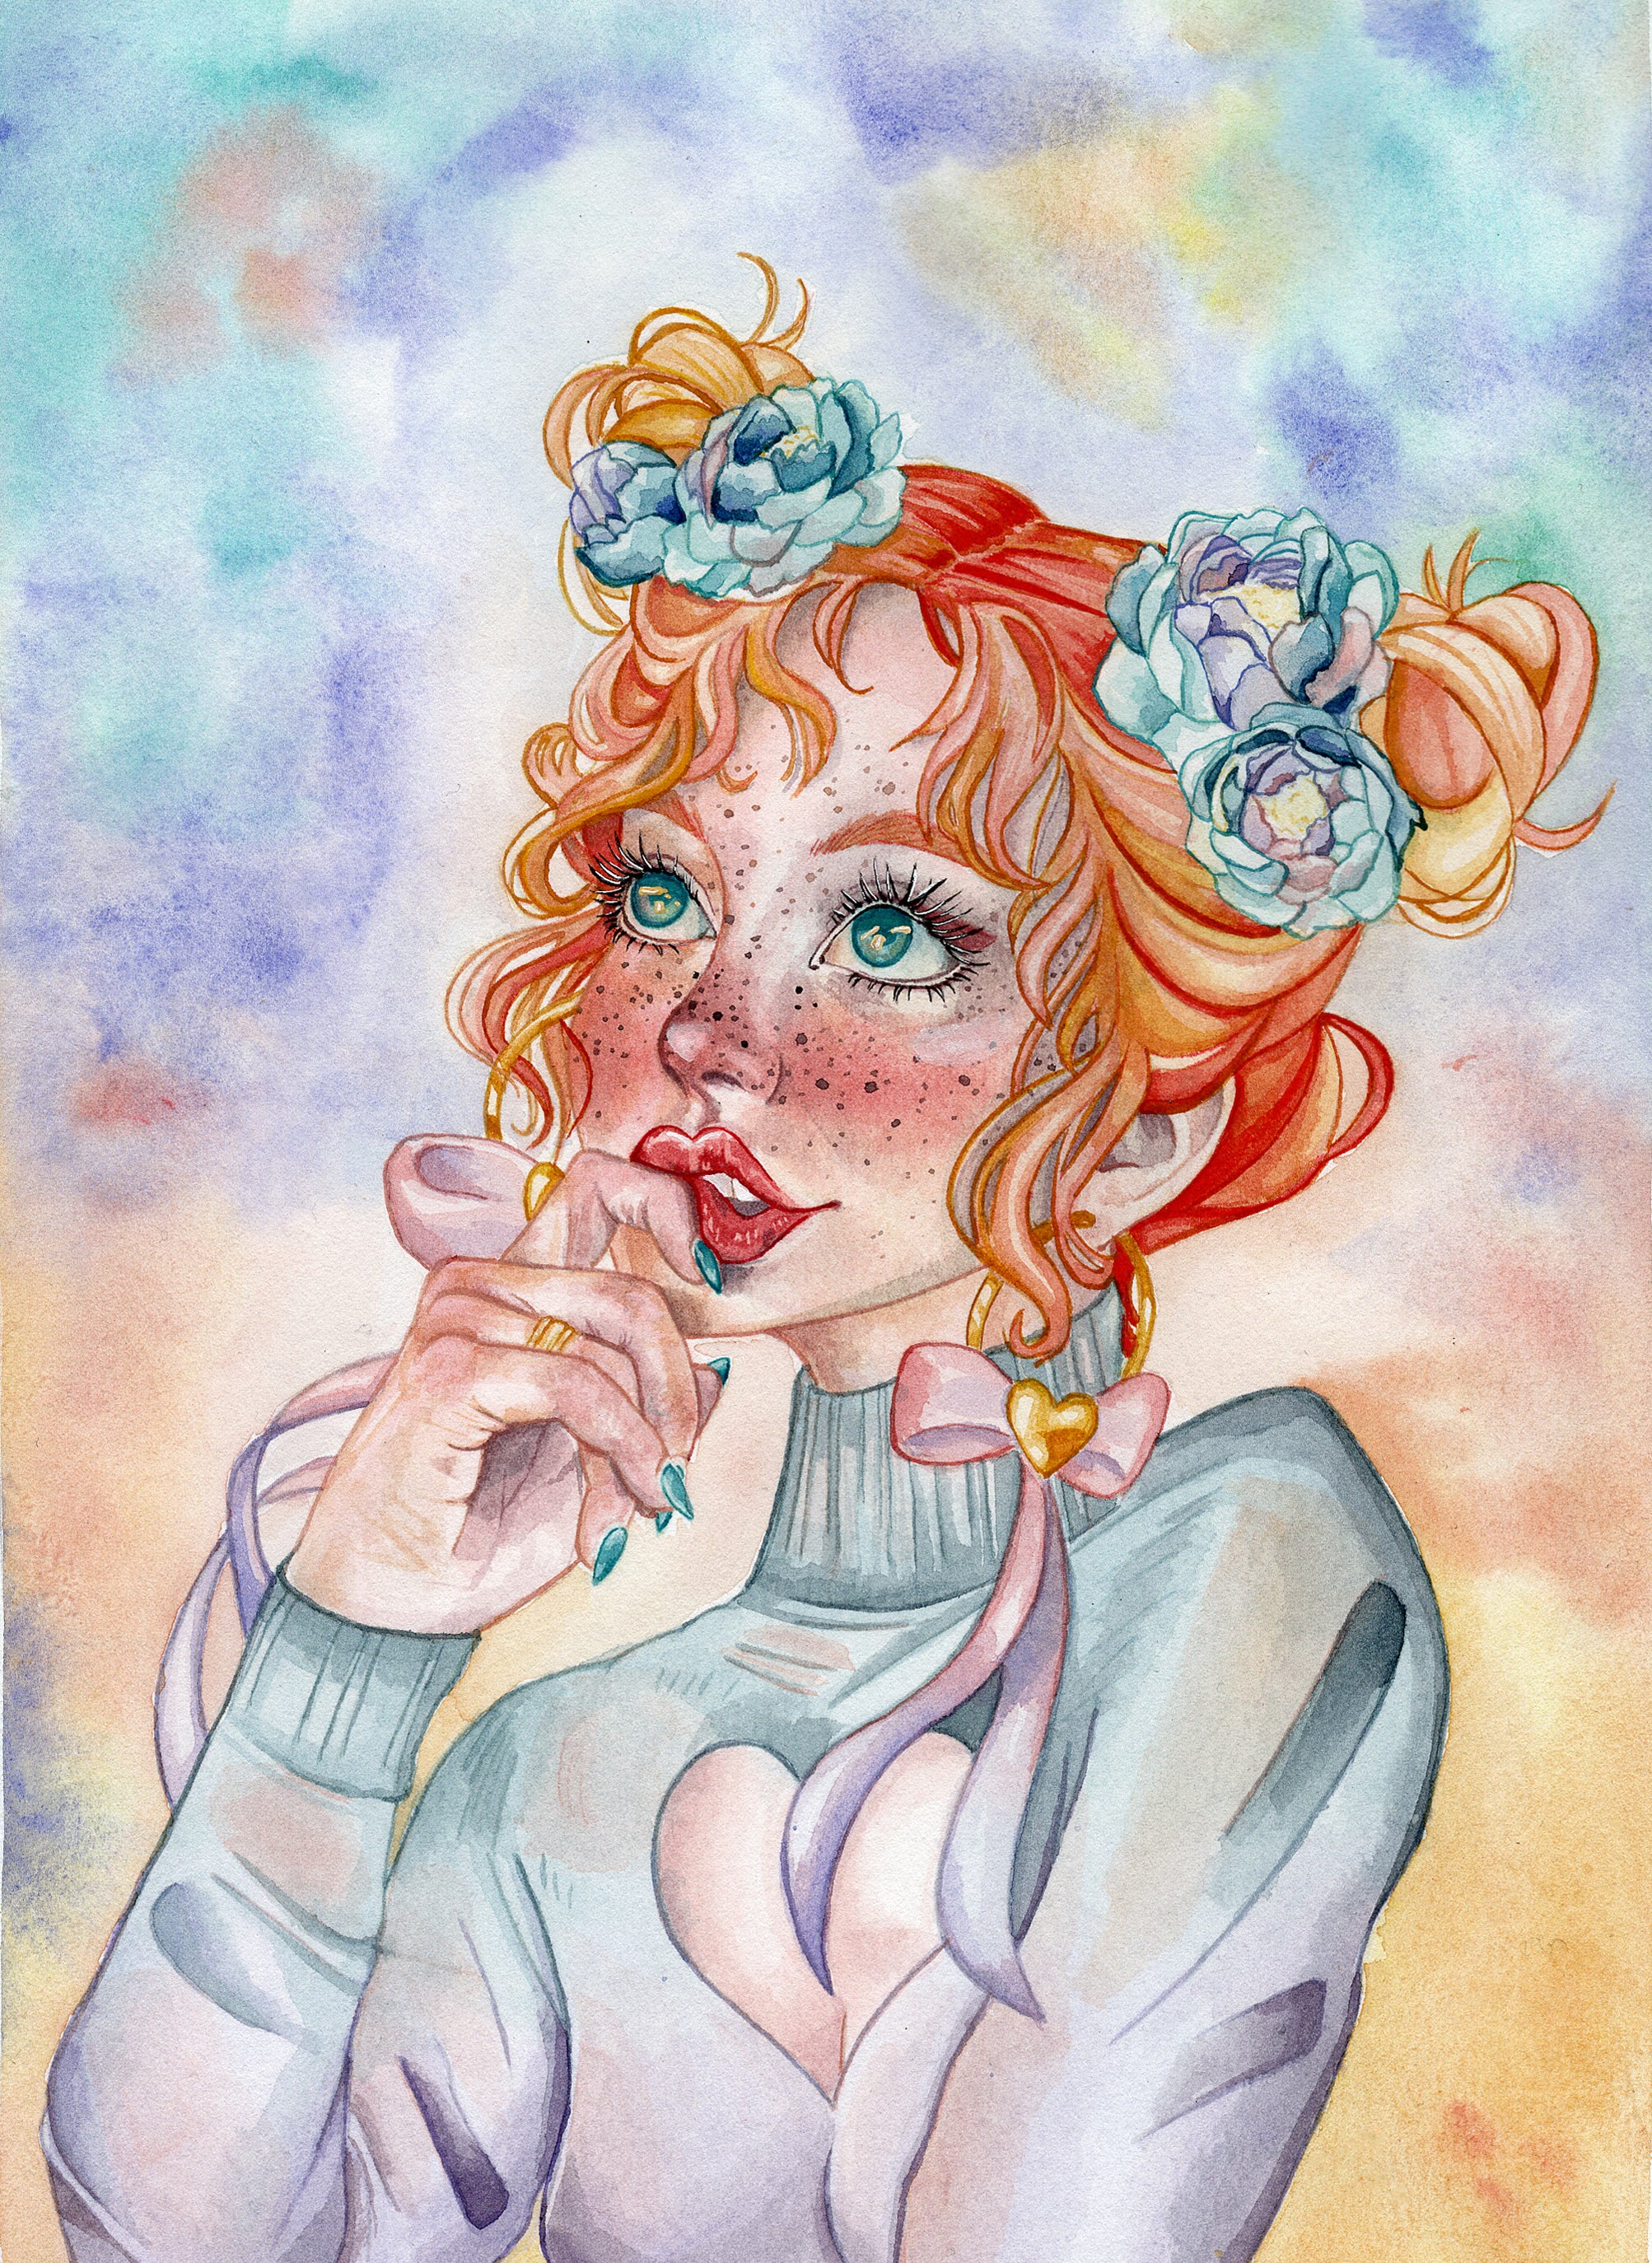 Watercolor painting of a redhead. Her hair is put in two buns at the top of her head with flowers around them. She's wearing a blue and purple turtleneck sweater with a heart cutout over the chest.